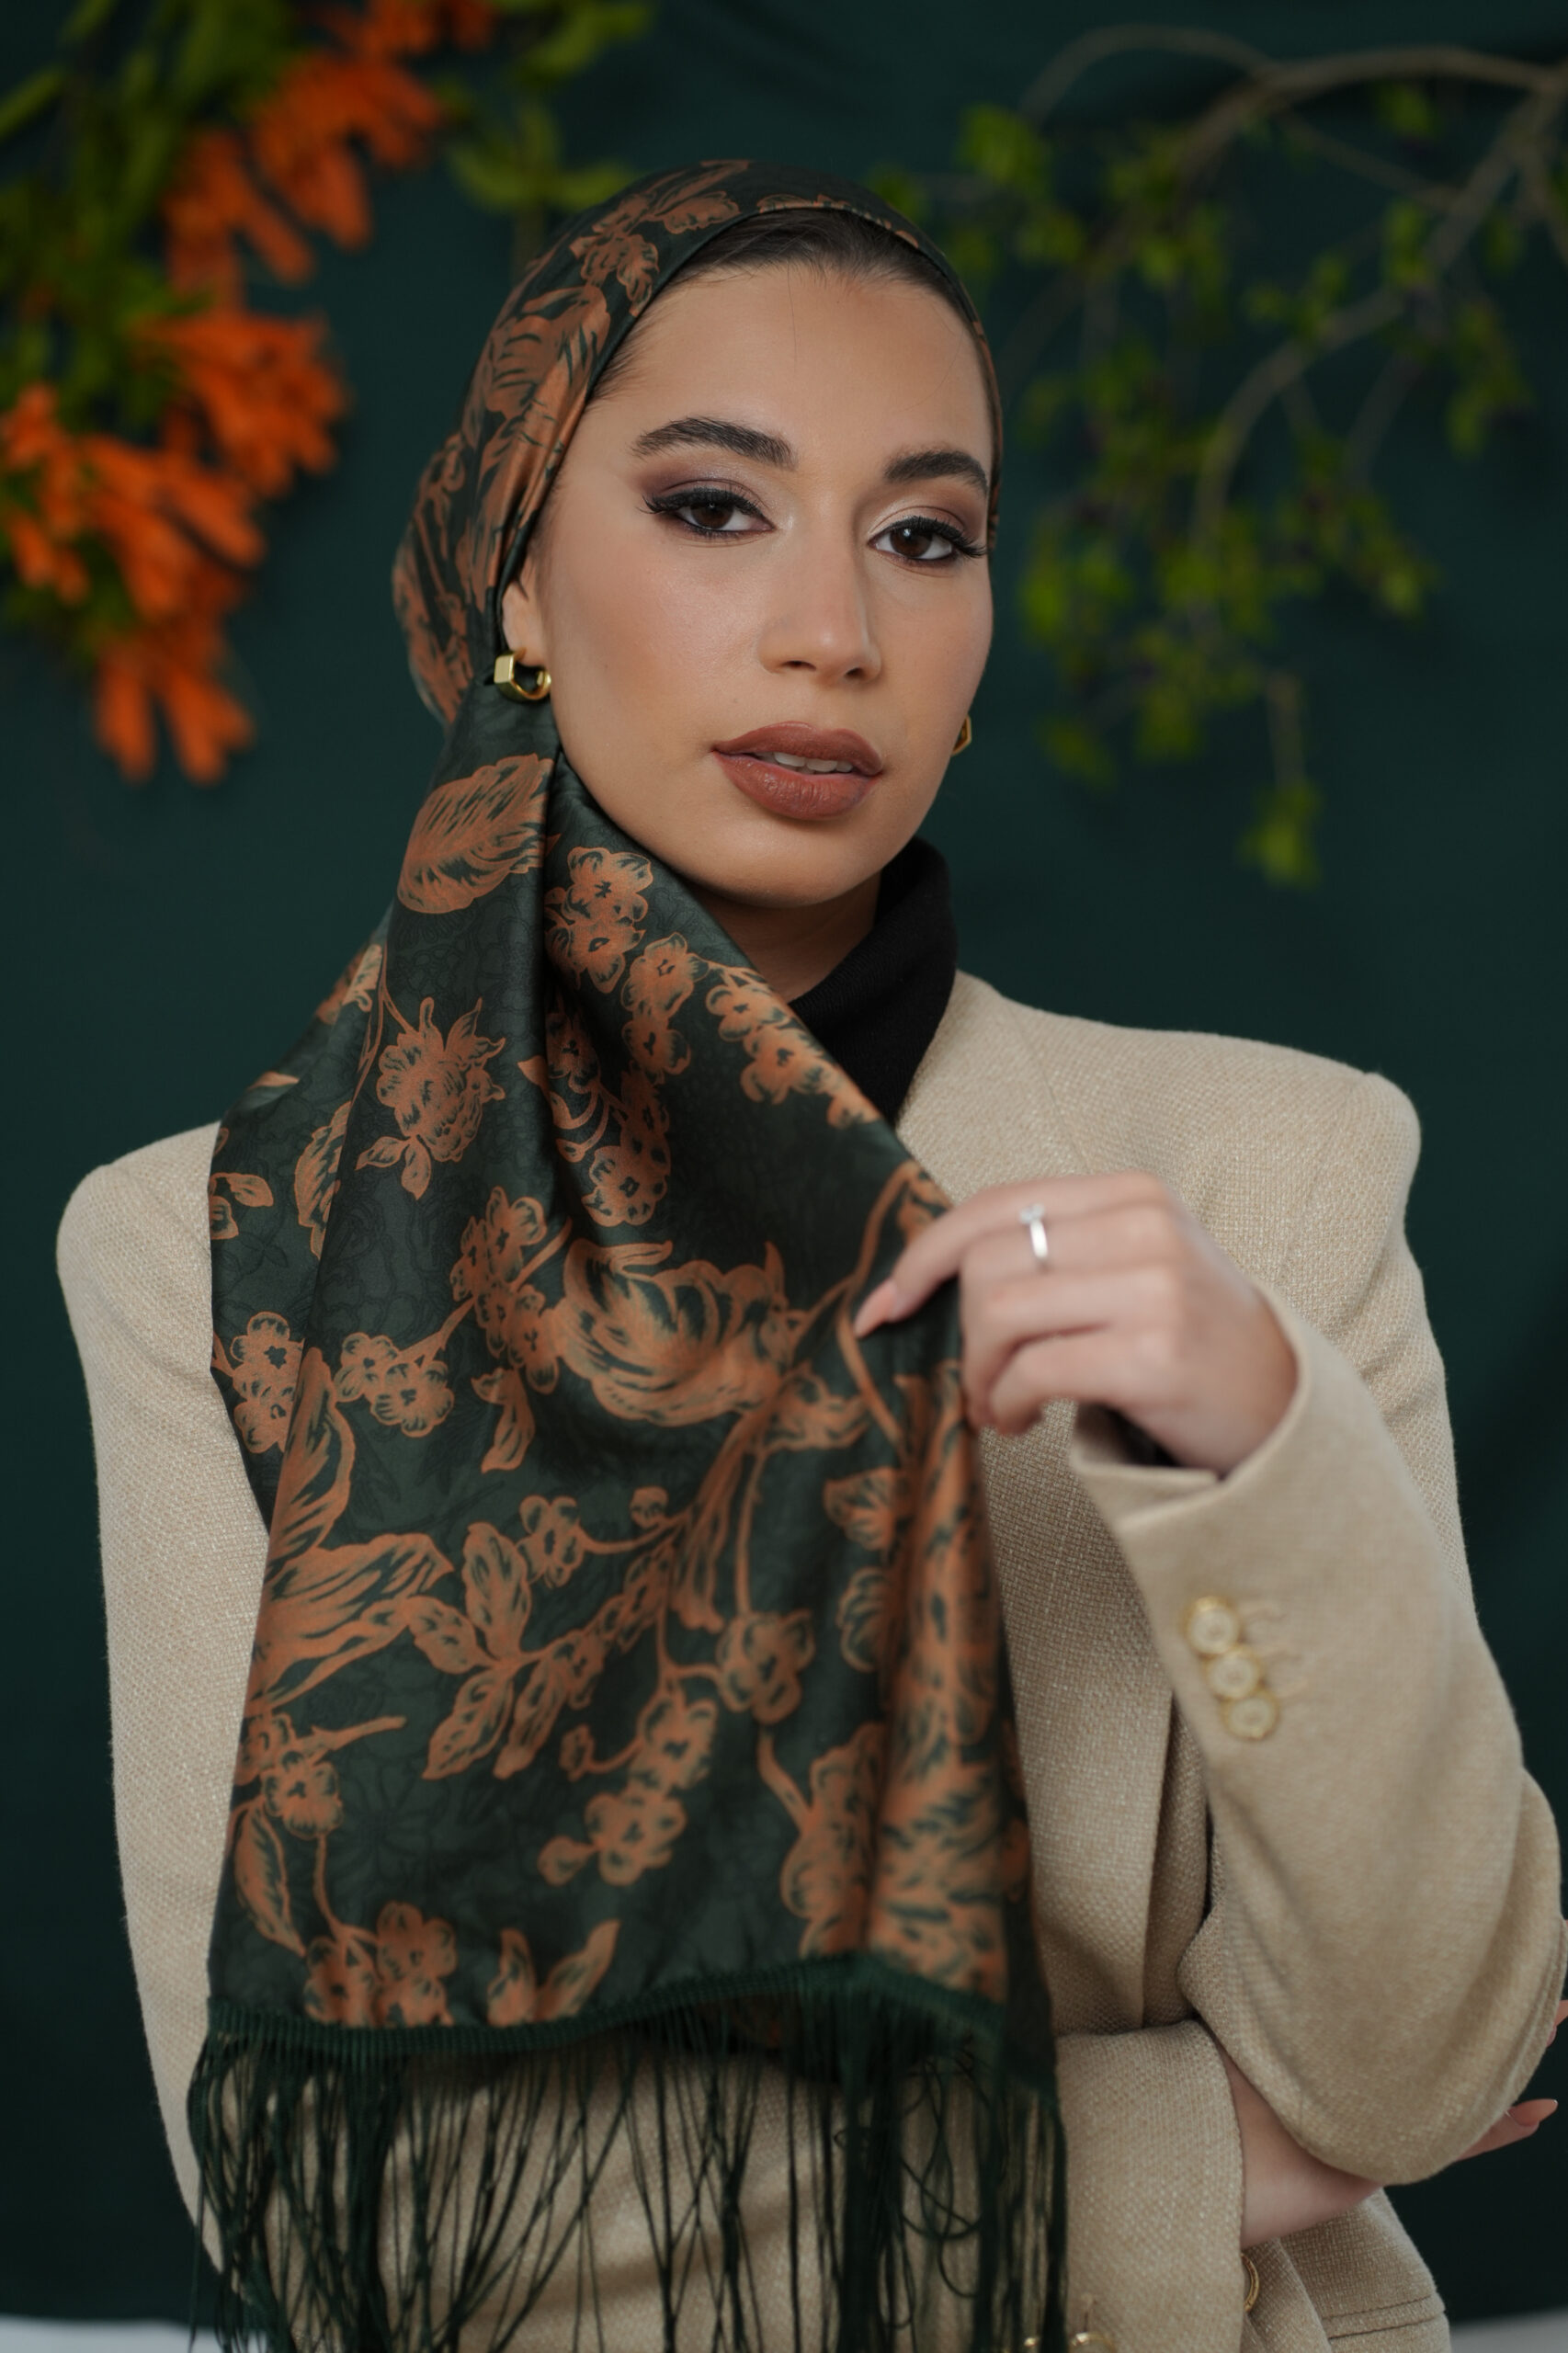 Printed Dark Green and Brown Flowers Headscarf With Fringes